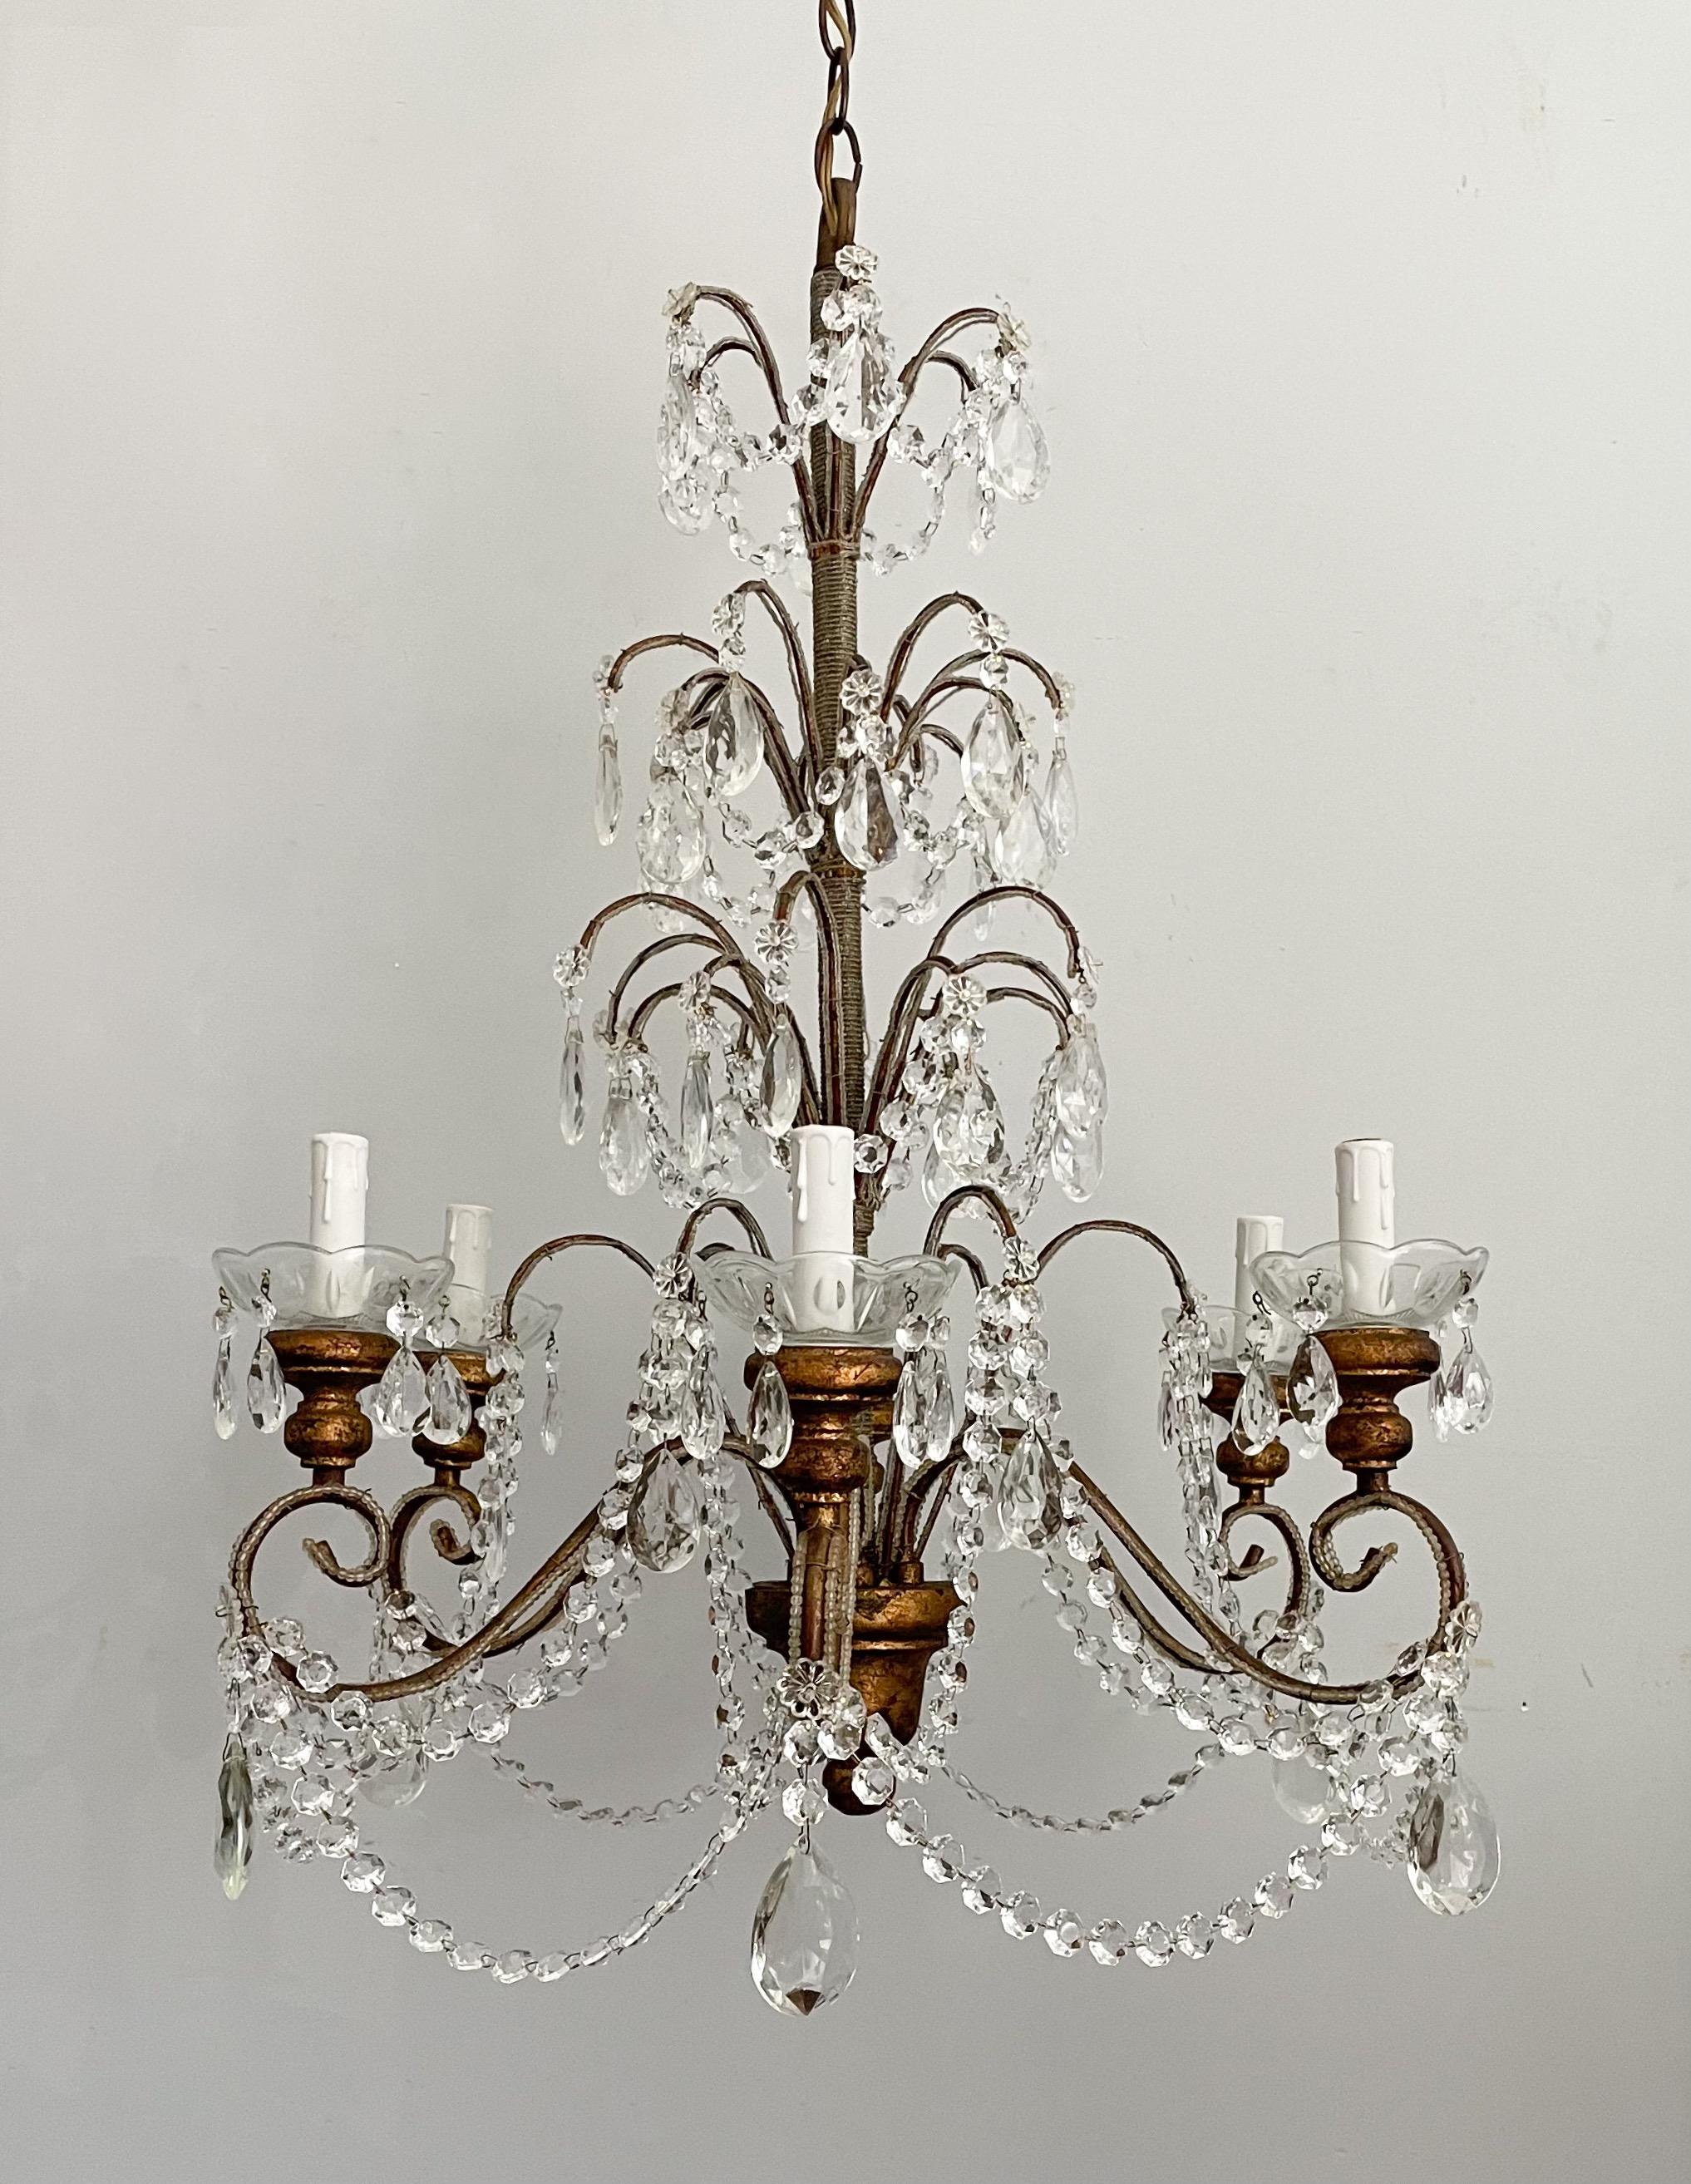 Beautiful, Italian gilt-iron and crystal chandelier.

The chandelier features a gilded iron frame wrapped with tiny glass beads, giltwood components and faceted crystal decorations.

The chandelier is wired and in working condition, it requires